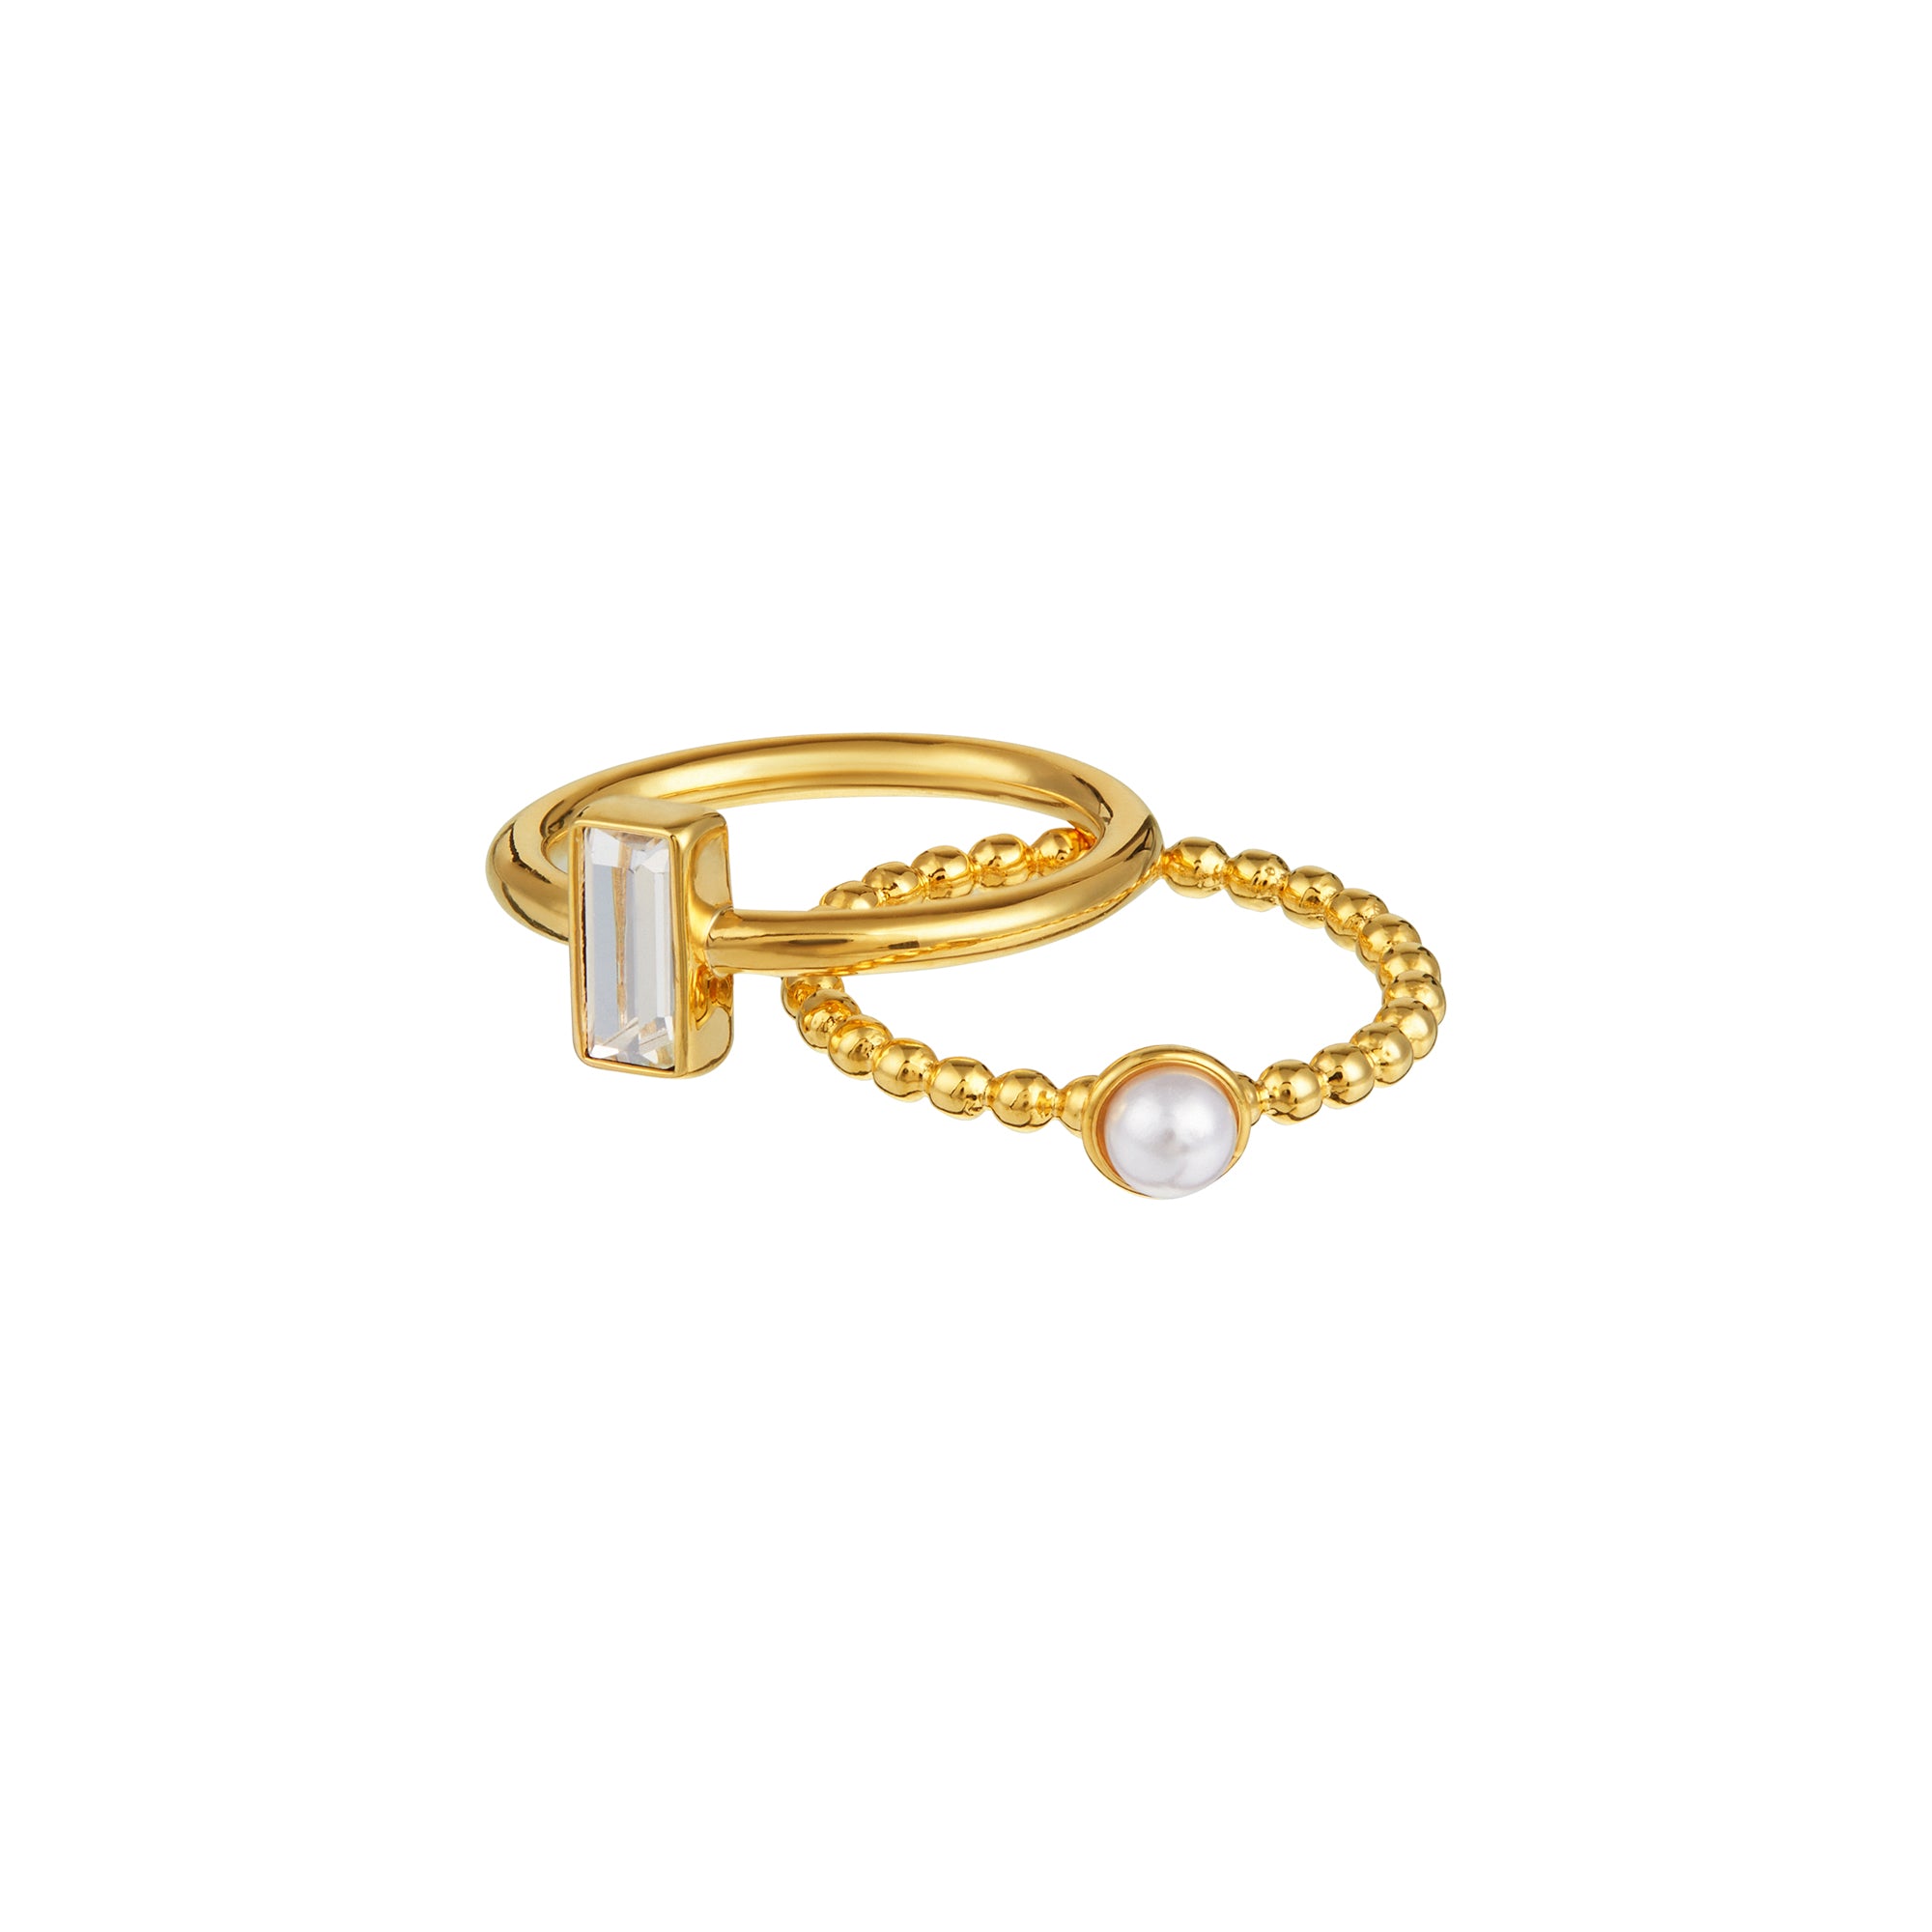 Pearl & Baguette Rings Made With Swarovski Crystals S/M - Orelia London